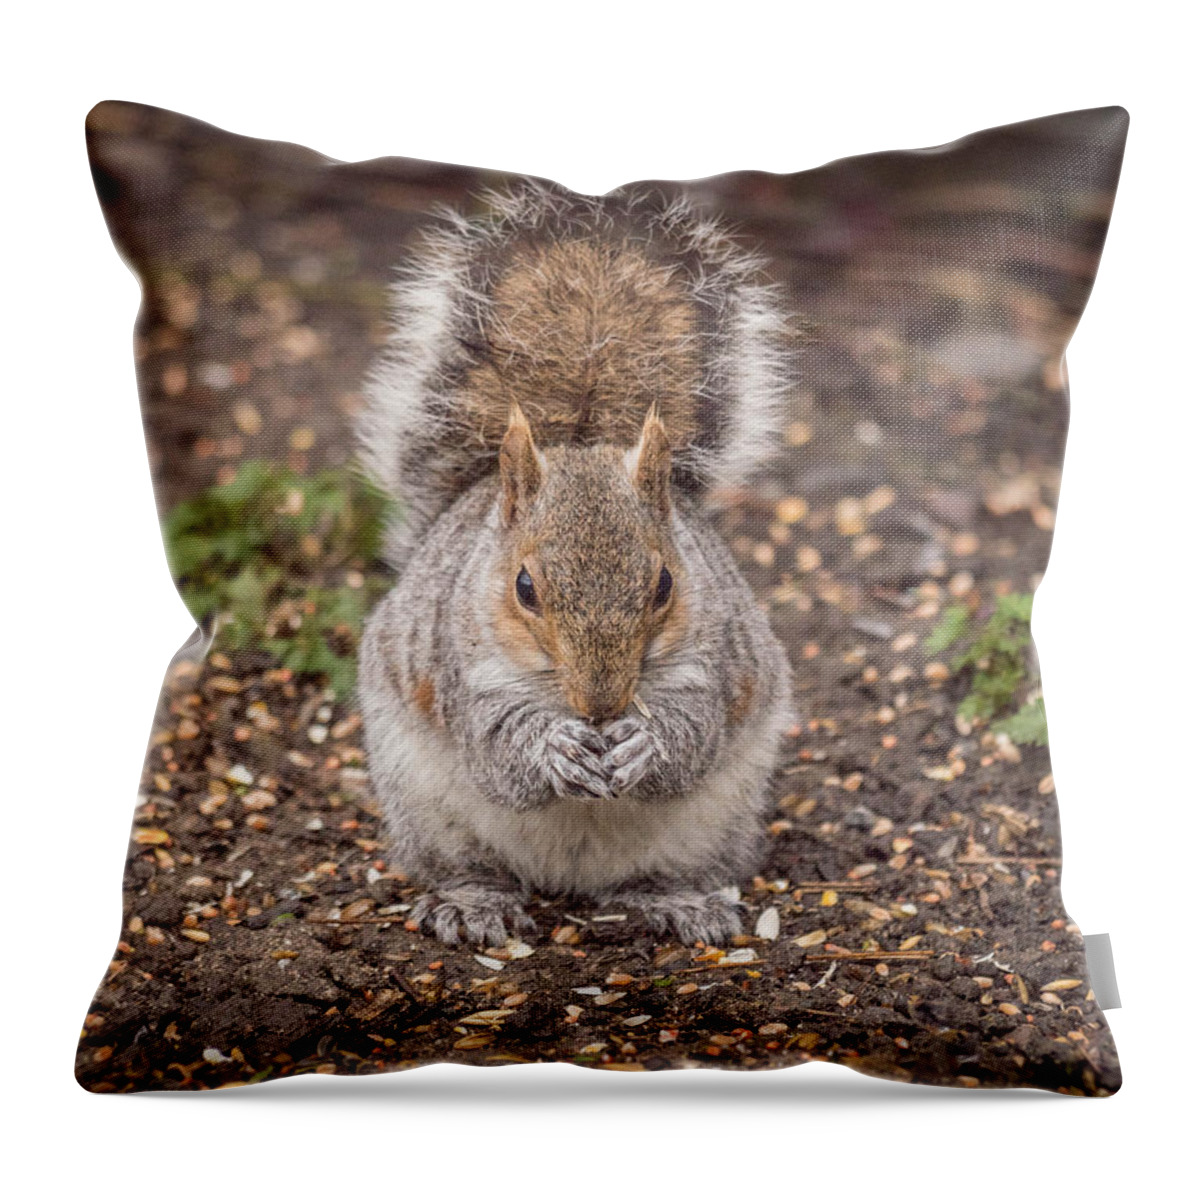 Birds & Animals Throw Pillow featuring the photograph Going Nutz by Nick Bywater